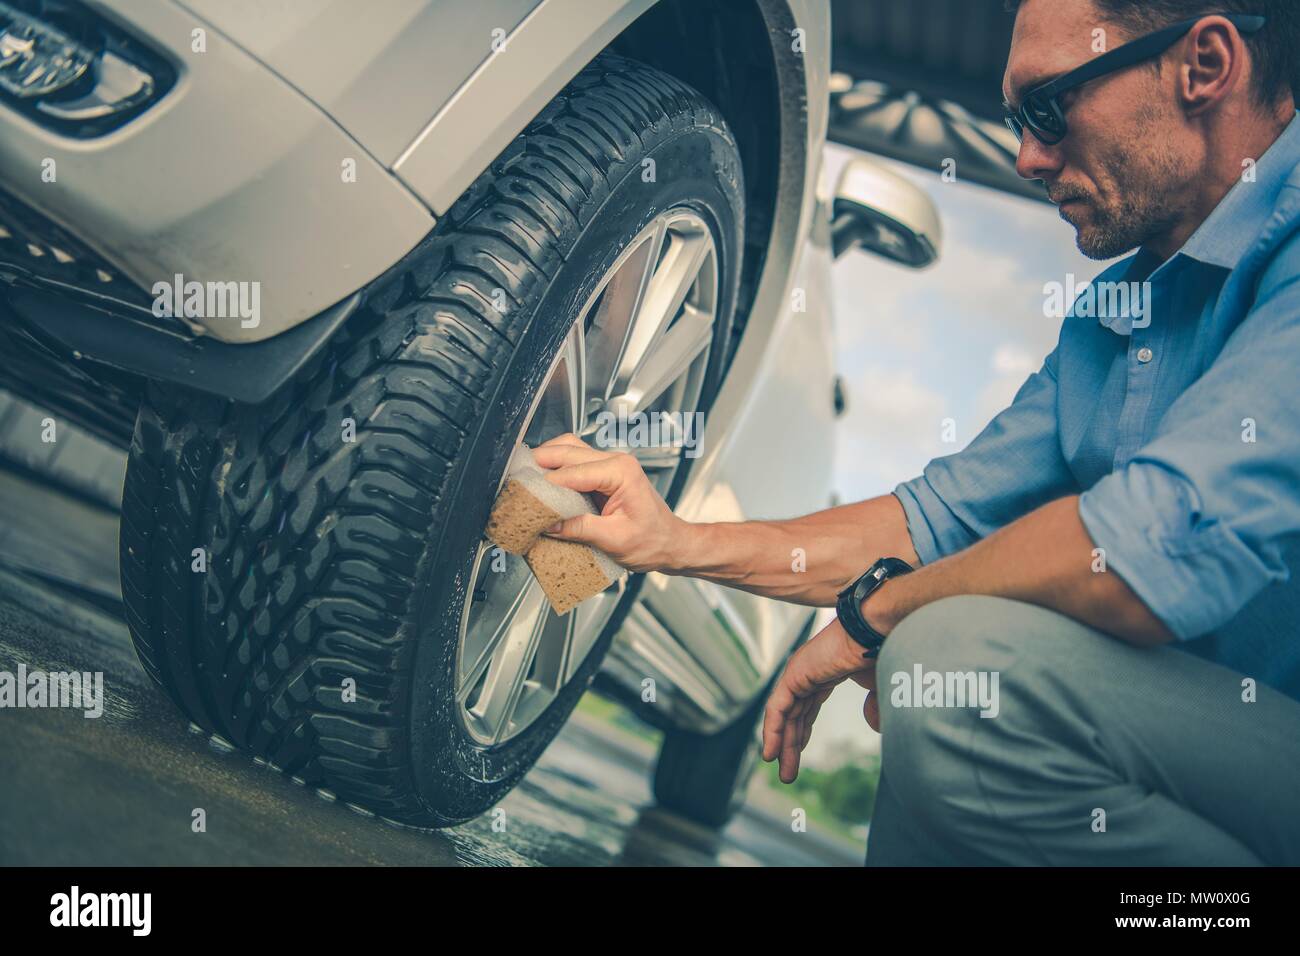 Alloy Wheels Hands Cleaning. Caucasian Men in His 30s Detailing His Vehicle in the Car Wash. Stock Photo